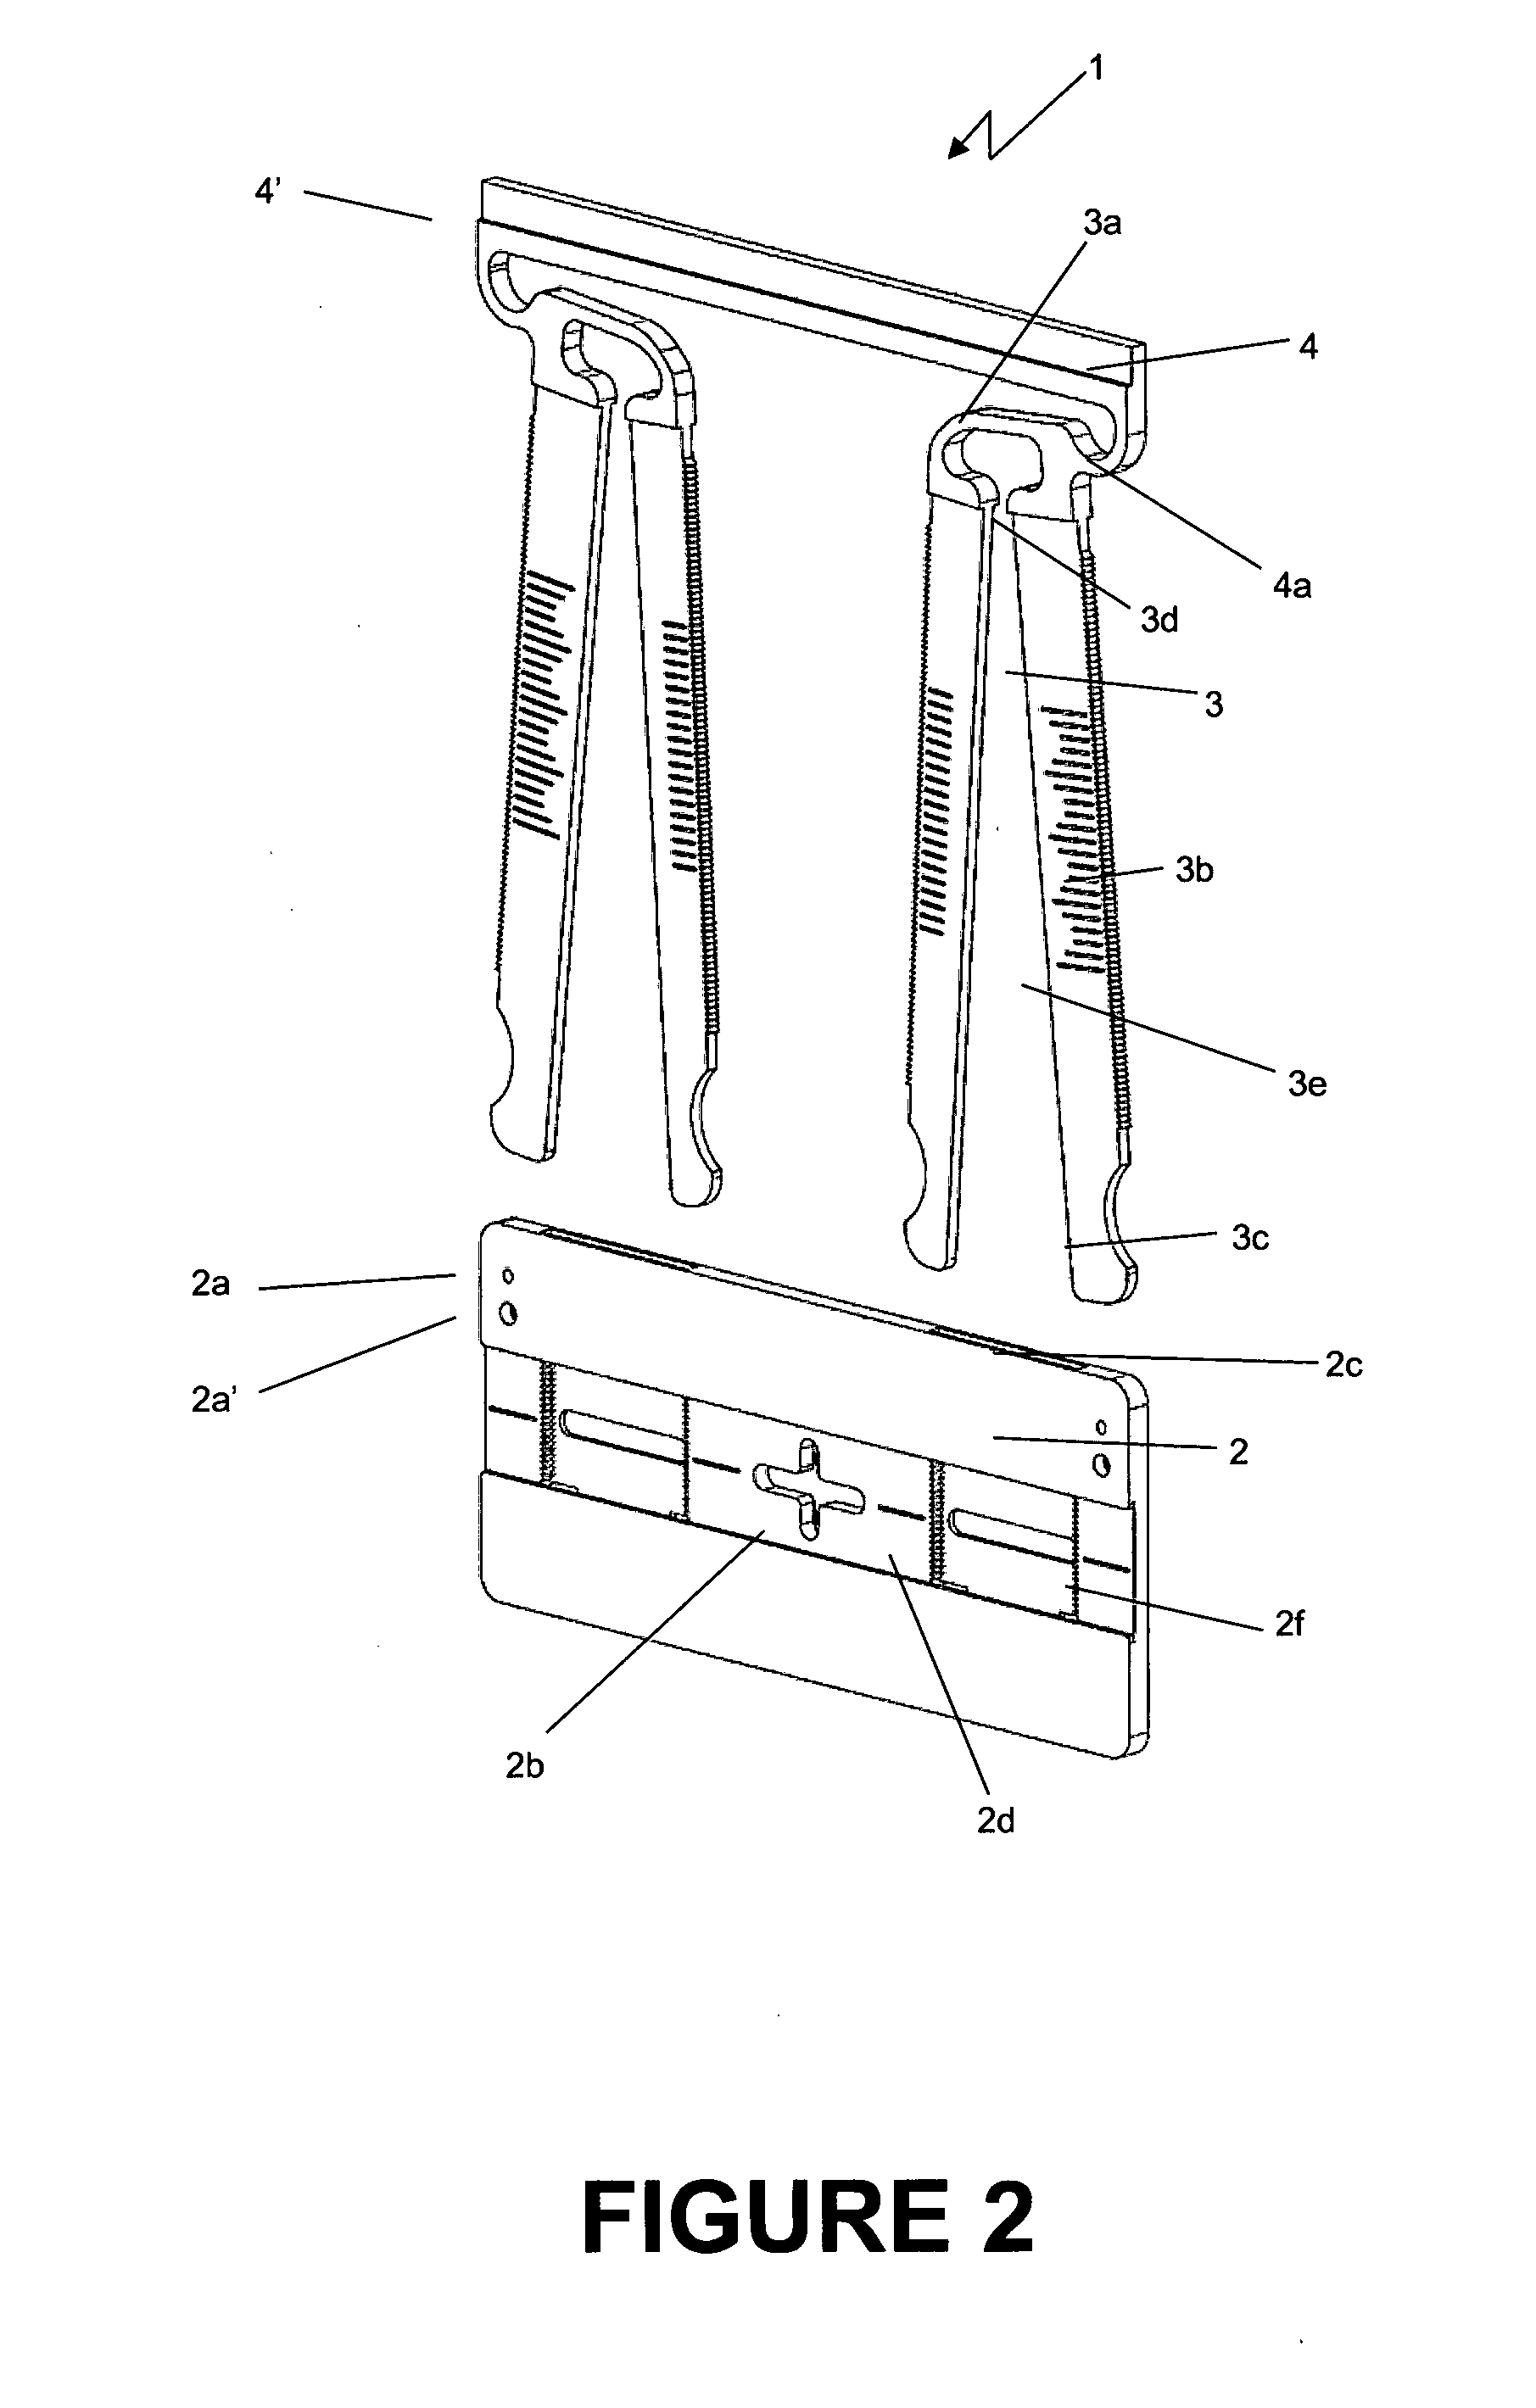 Apparatus for hanging a framed picture